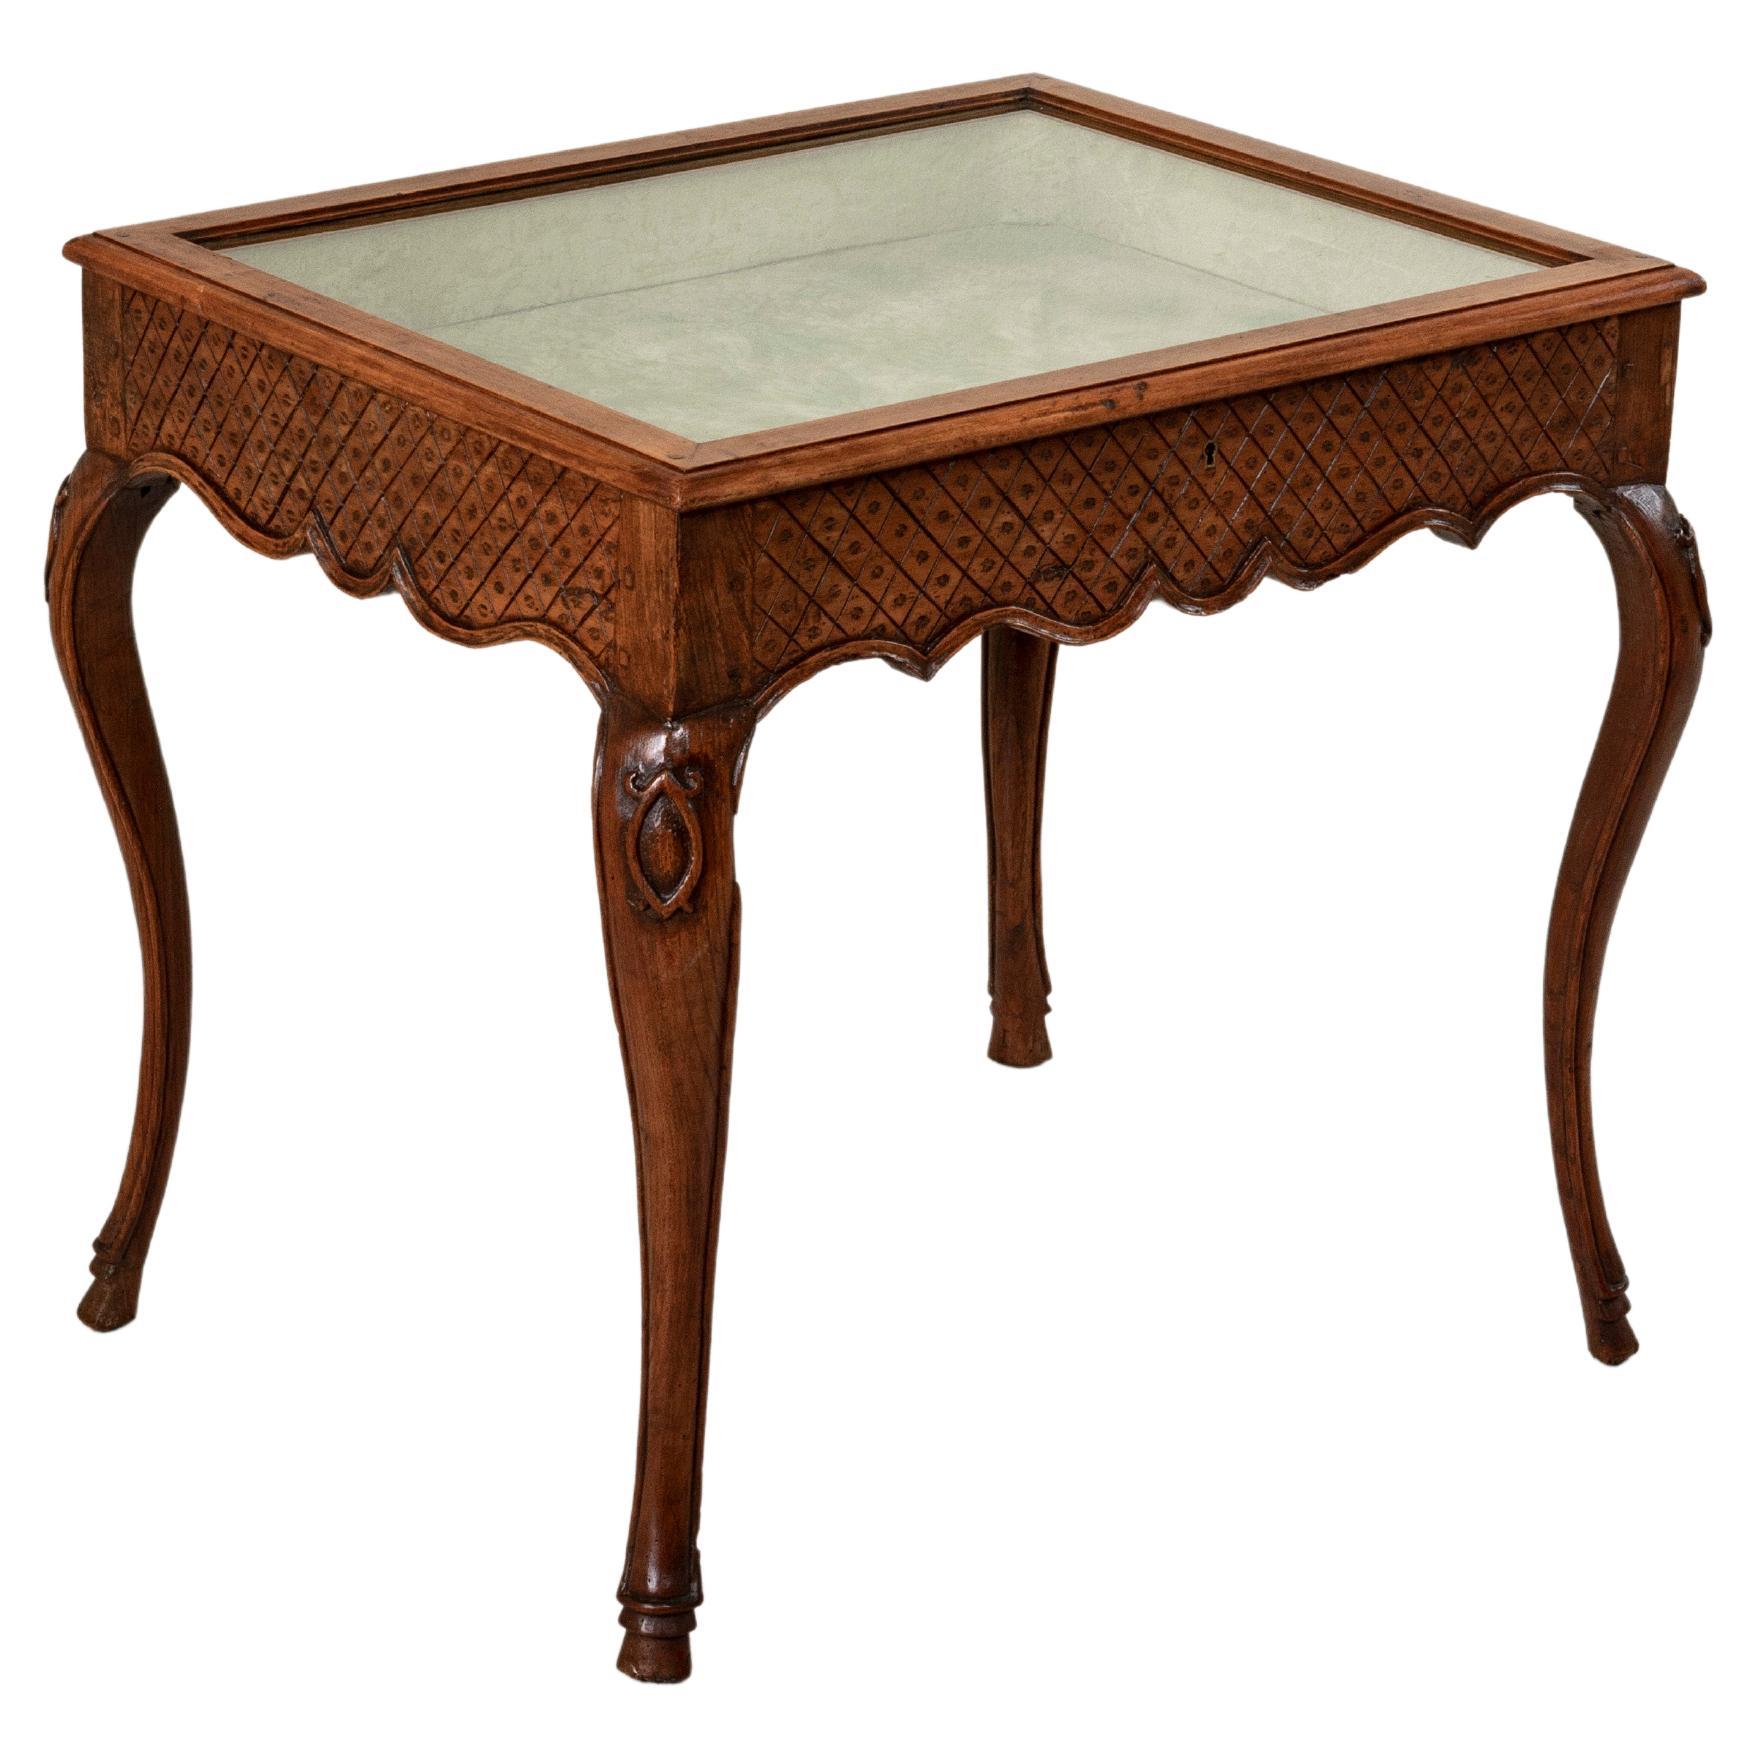 Late 19th Century French Regency Style Hand Carved Walnut Display Table, Vitrine For Sale